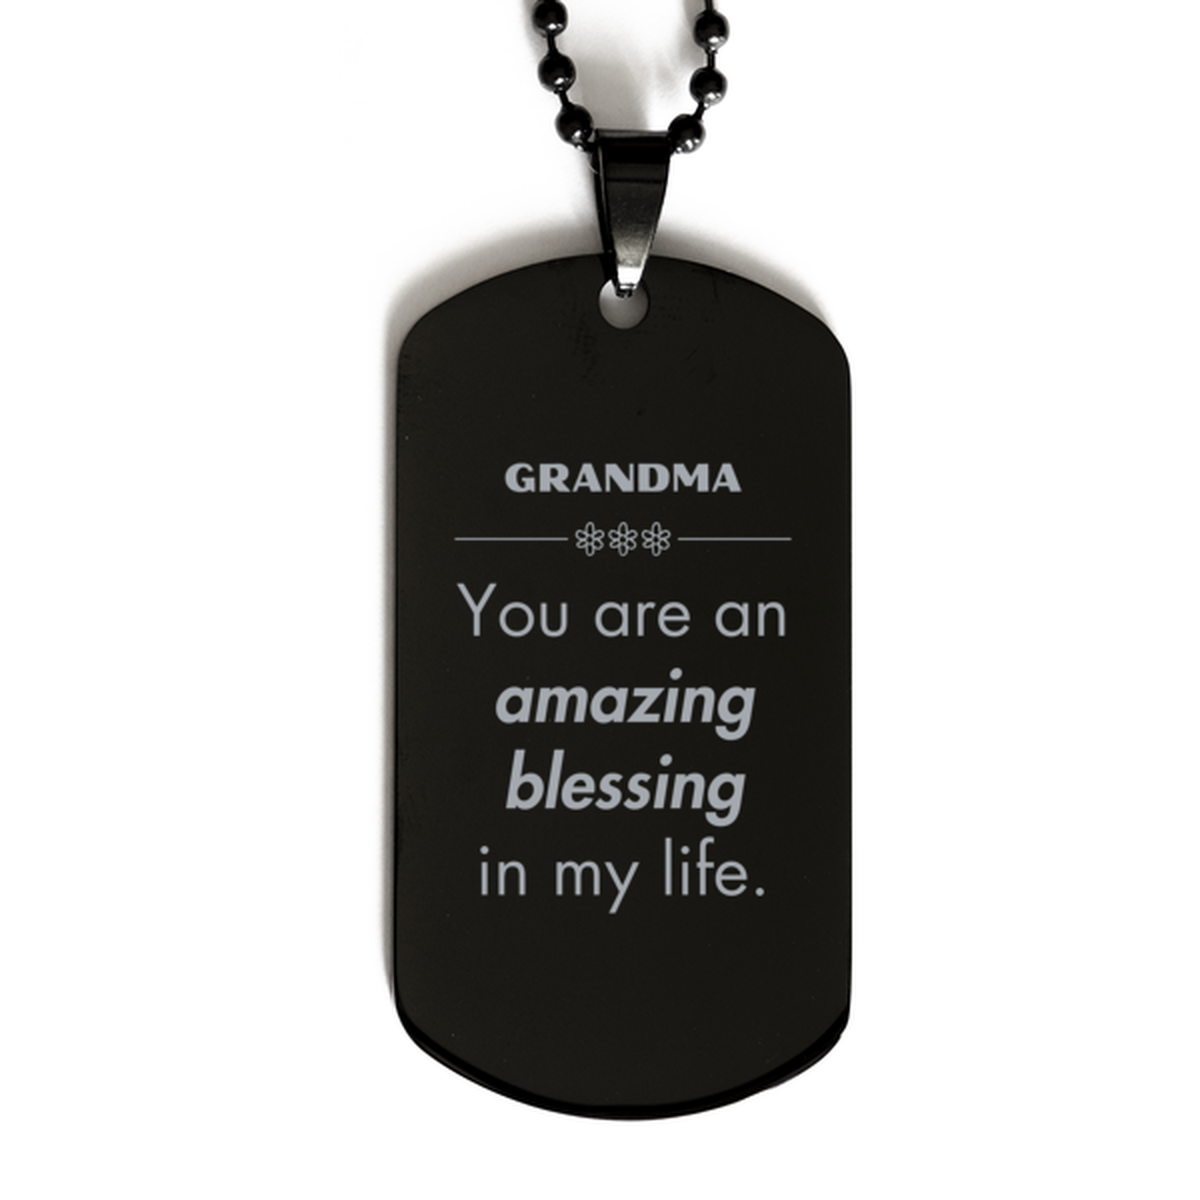 Grandma Black Dog Tag, You are an amazing blessing in my life, Thank You Gifts For Grandma, Inspirational Birthday Christmas Unique Gifts For Grandma